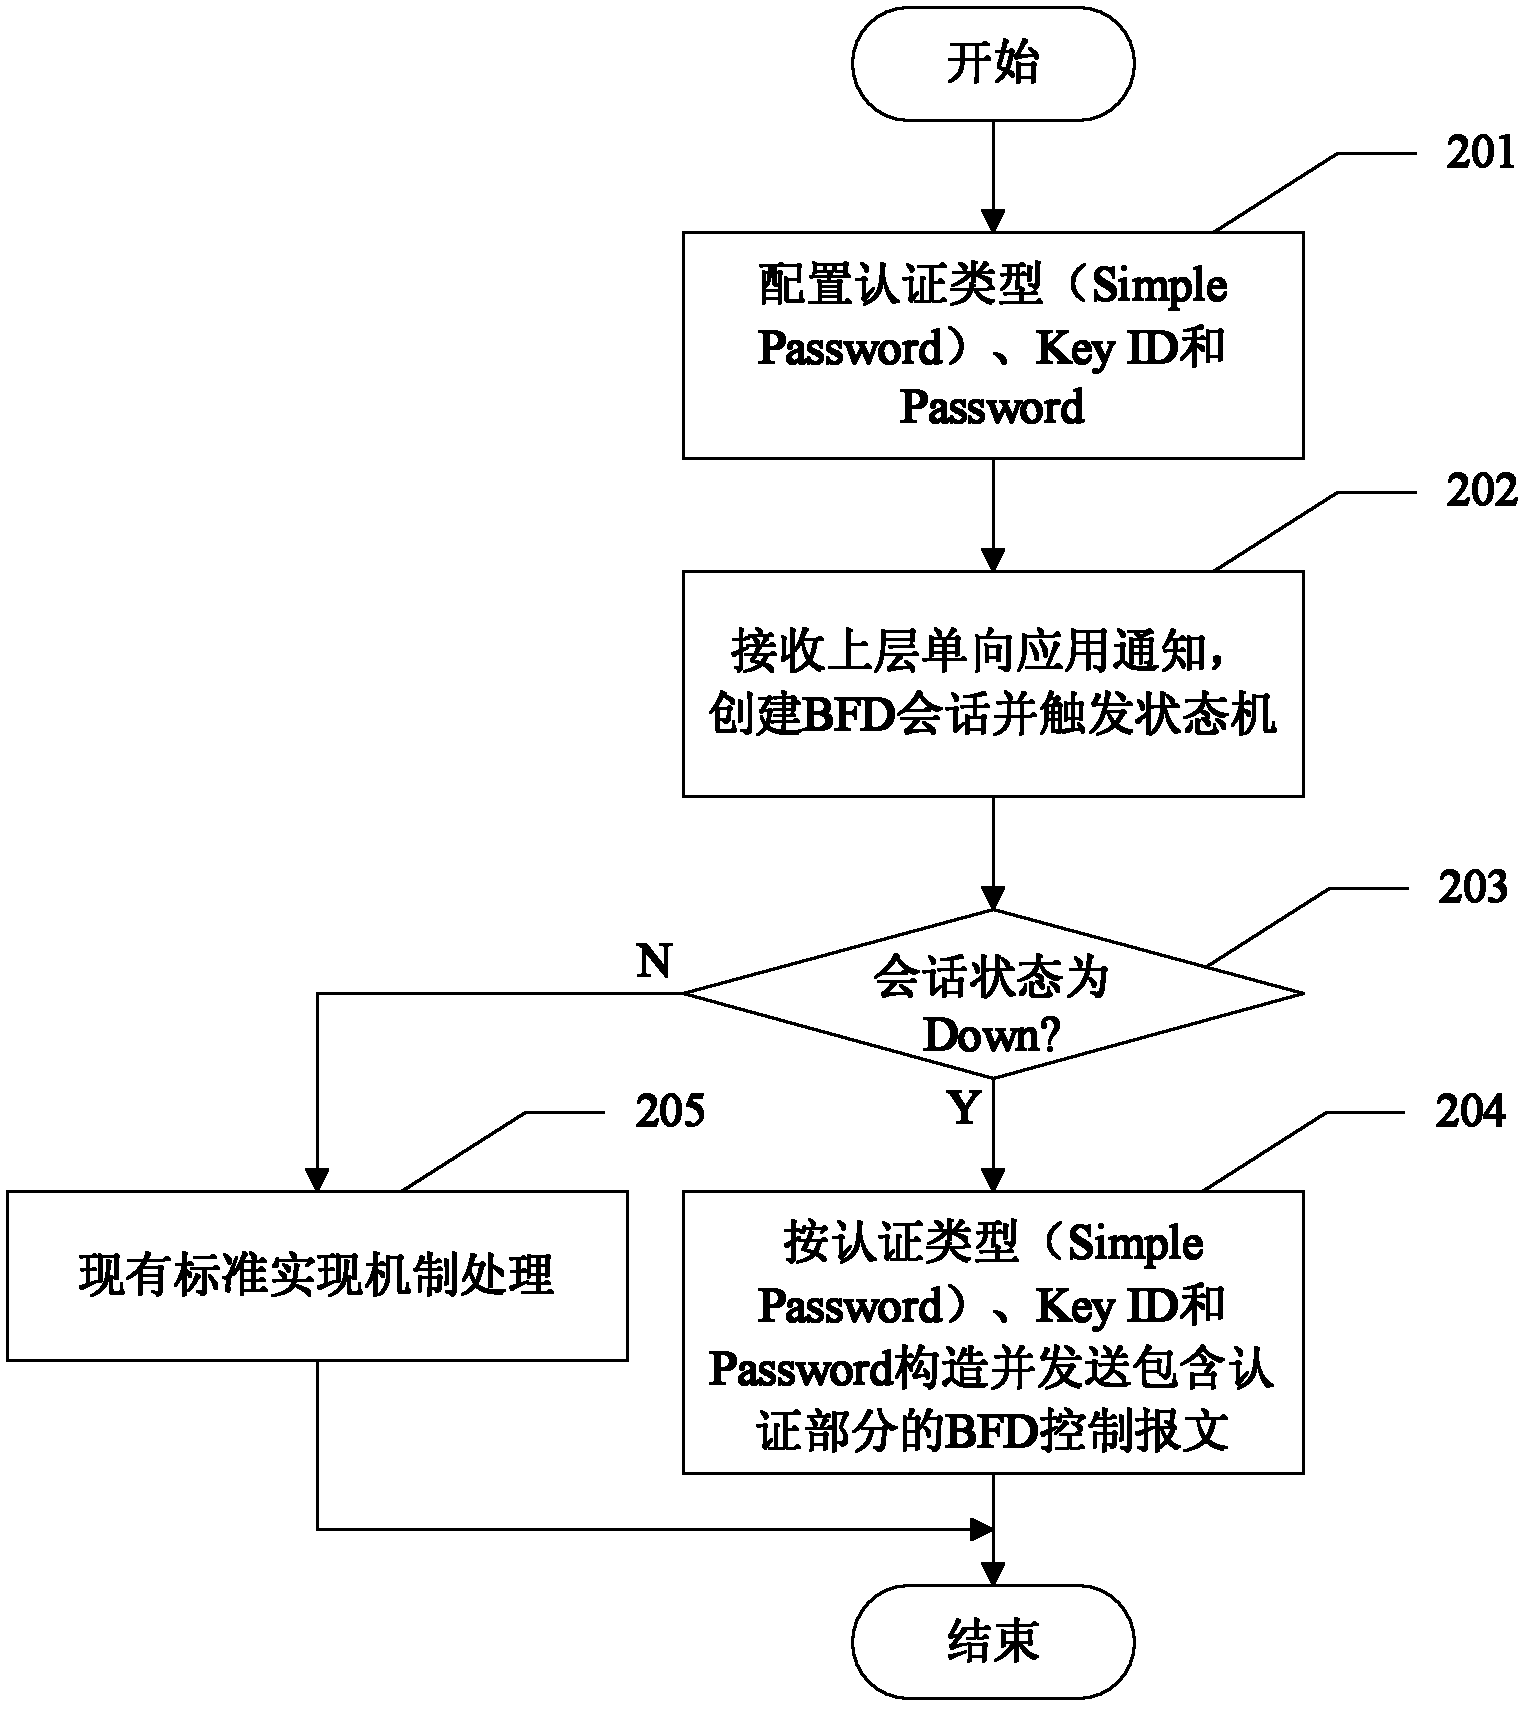 Bidirectional forwarding detection (BFD) session creation method and BFD session system used for unidirectional path detection